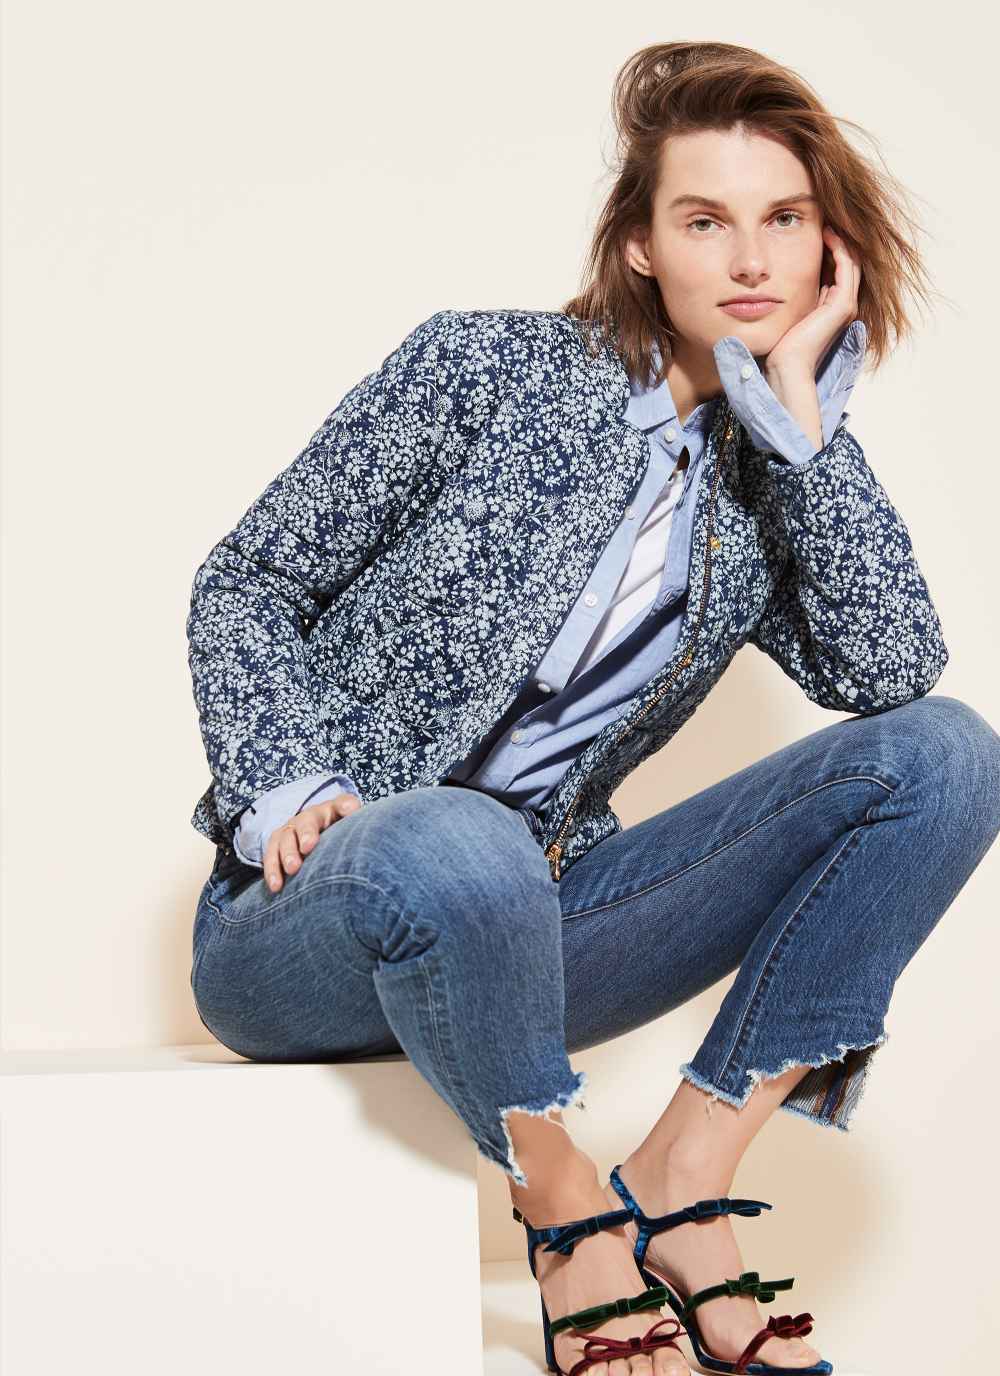 J.Crew’s new denim recycling program. Can we build a post with the pics below?